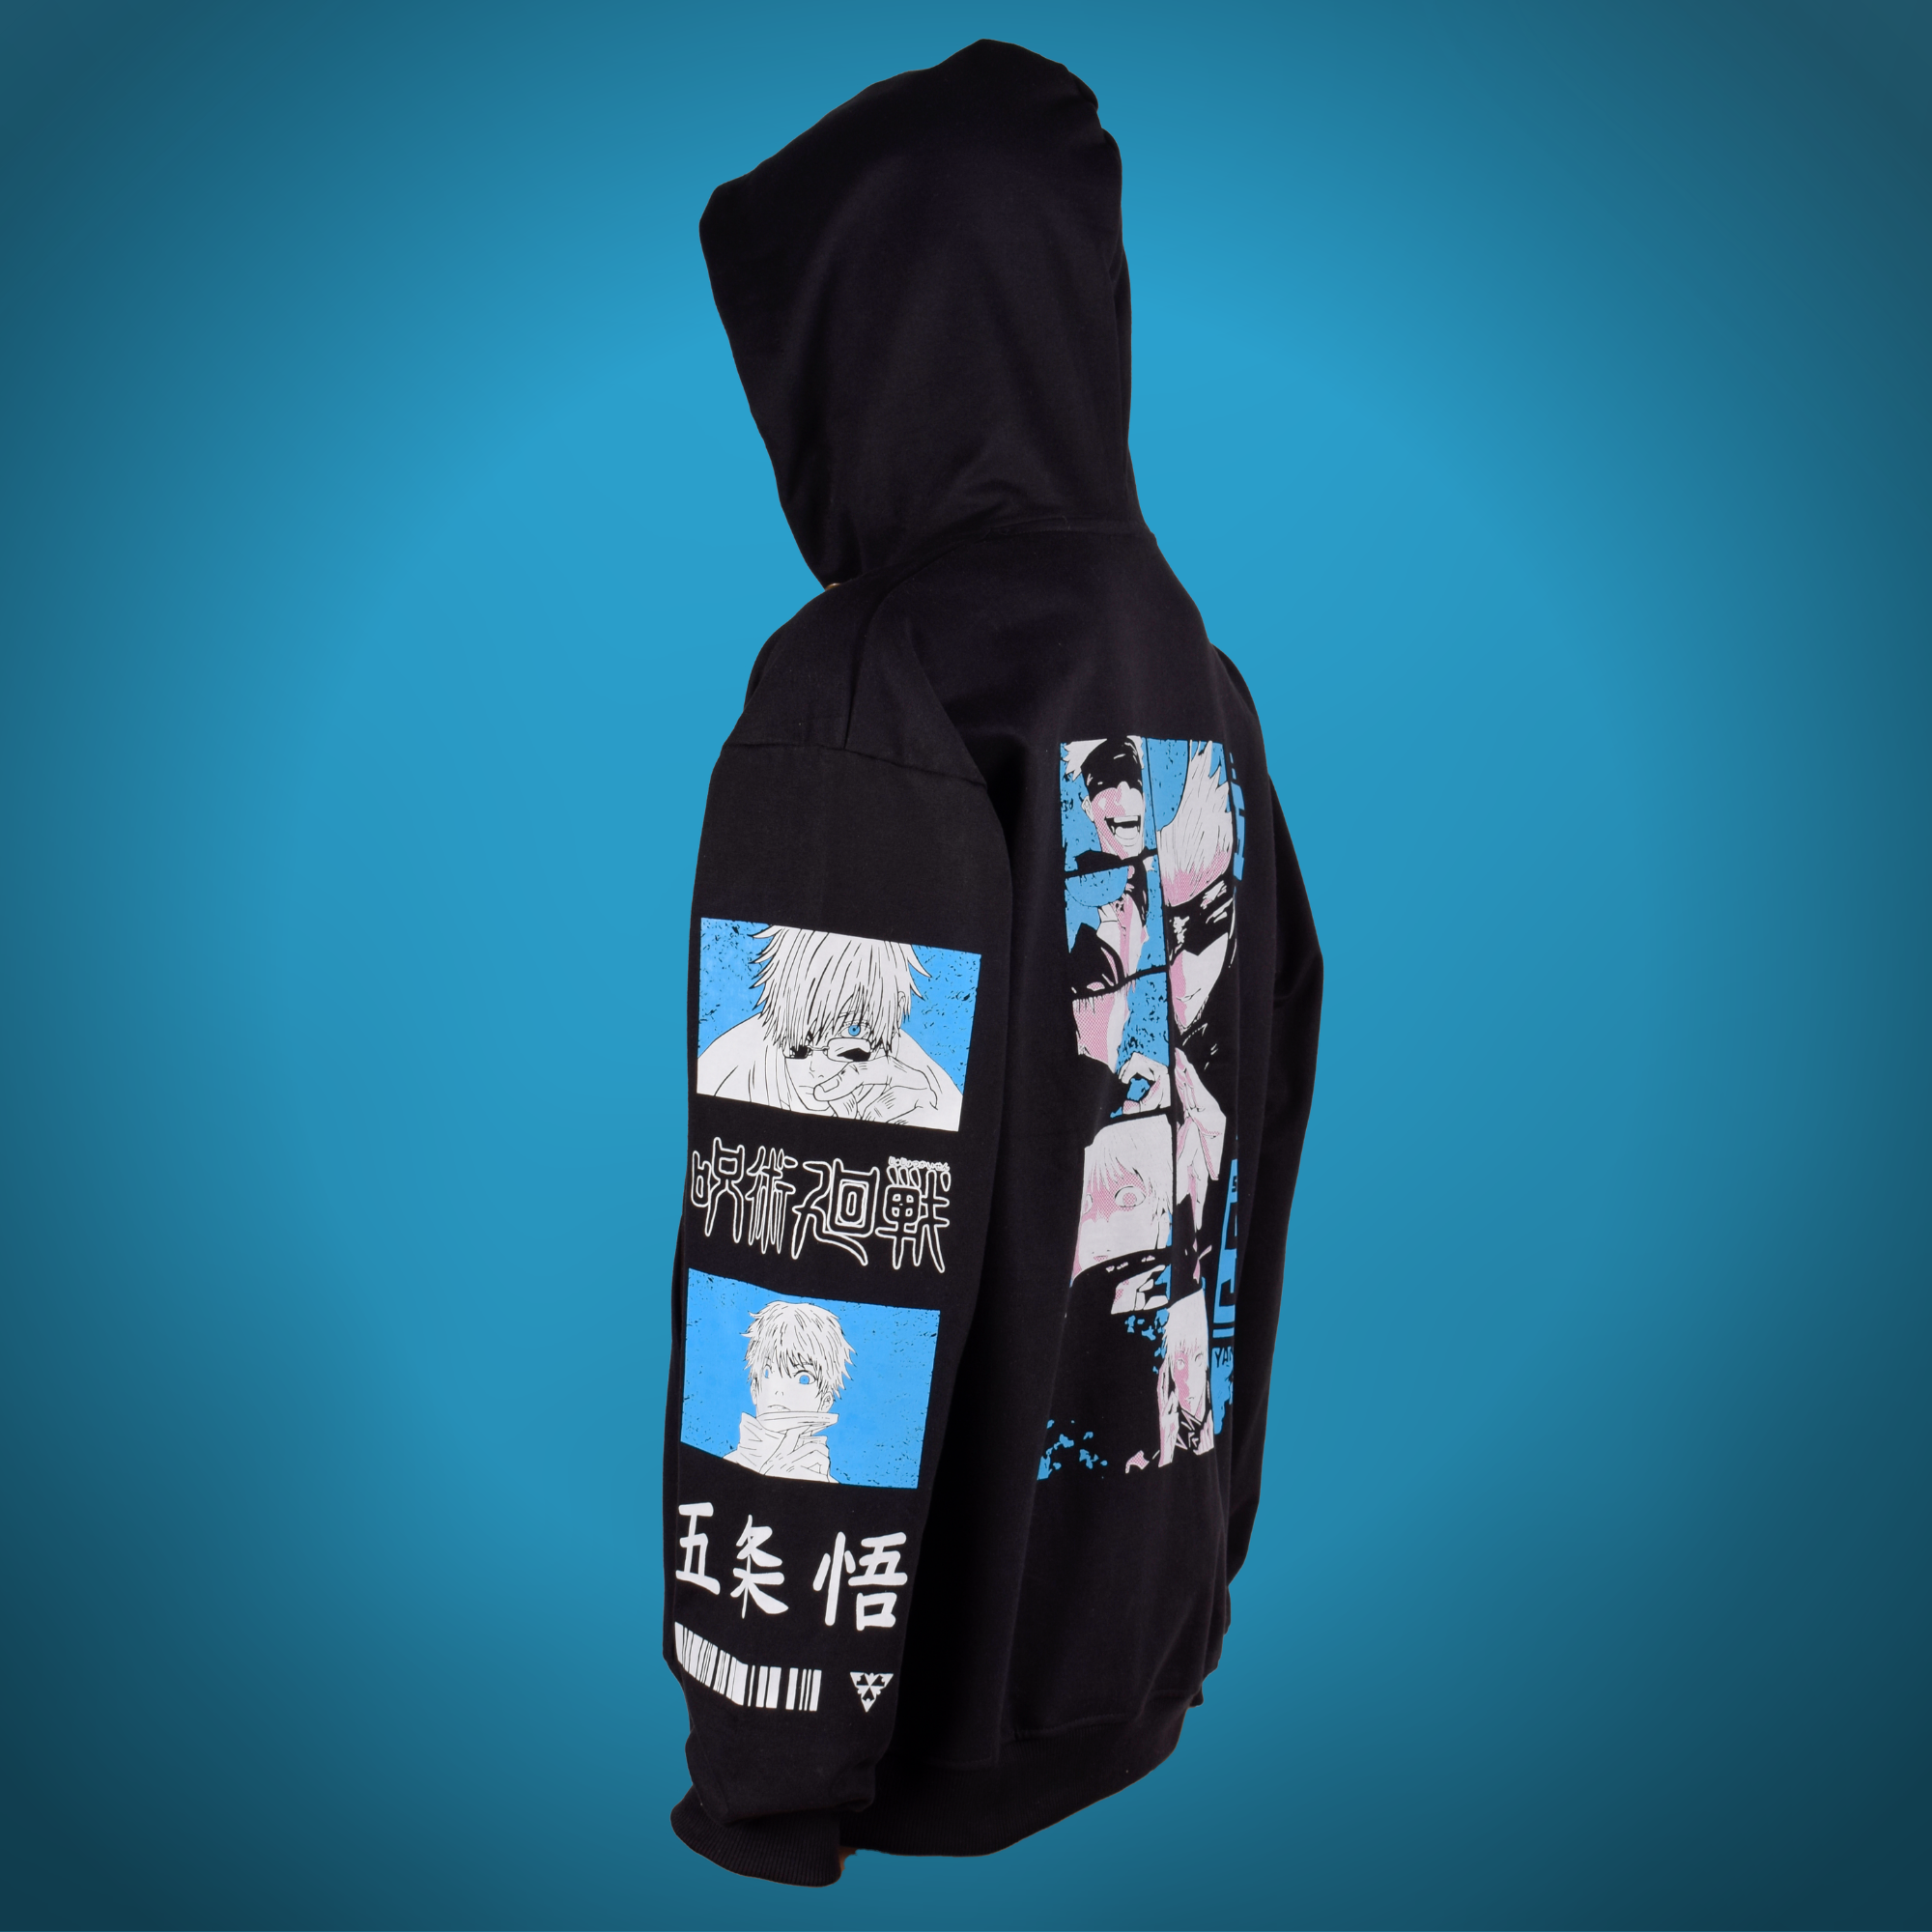 Shop The Gojo Satoru Hoodie Unique Design And Oversized Fit For A